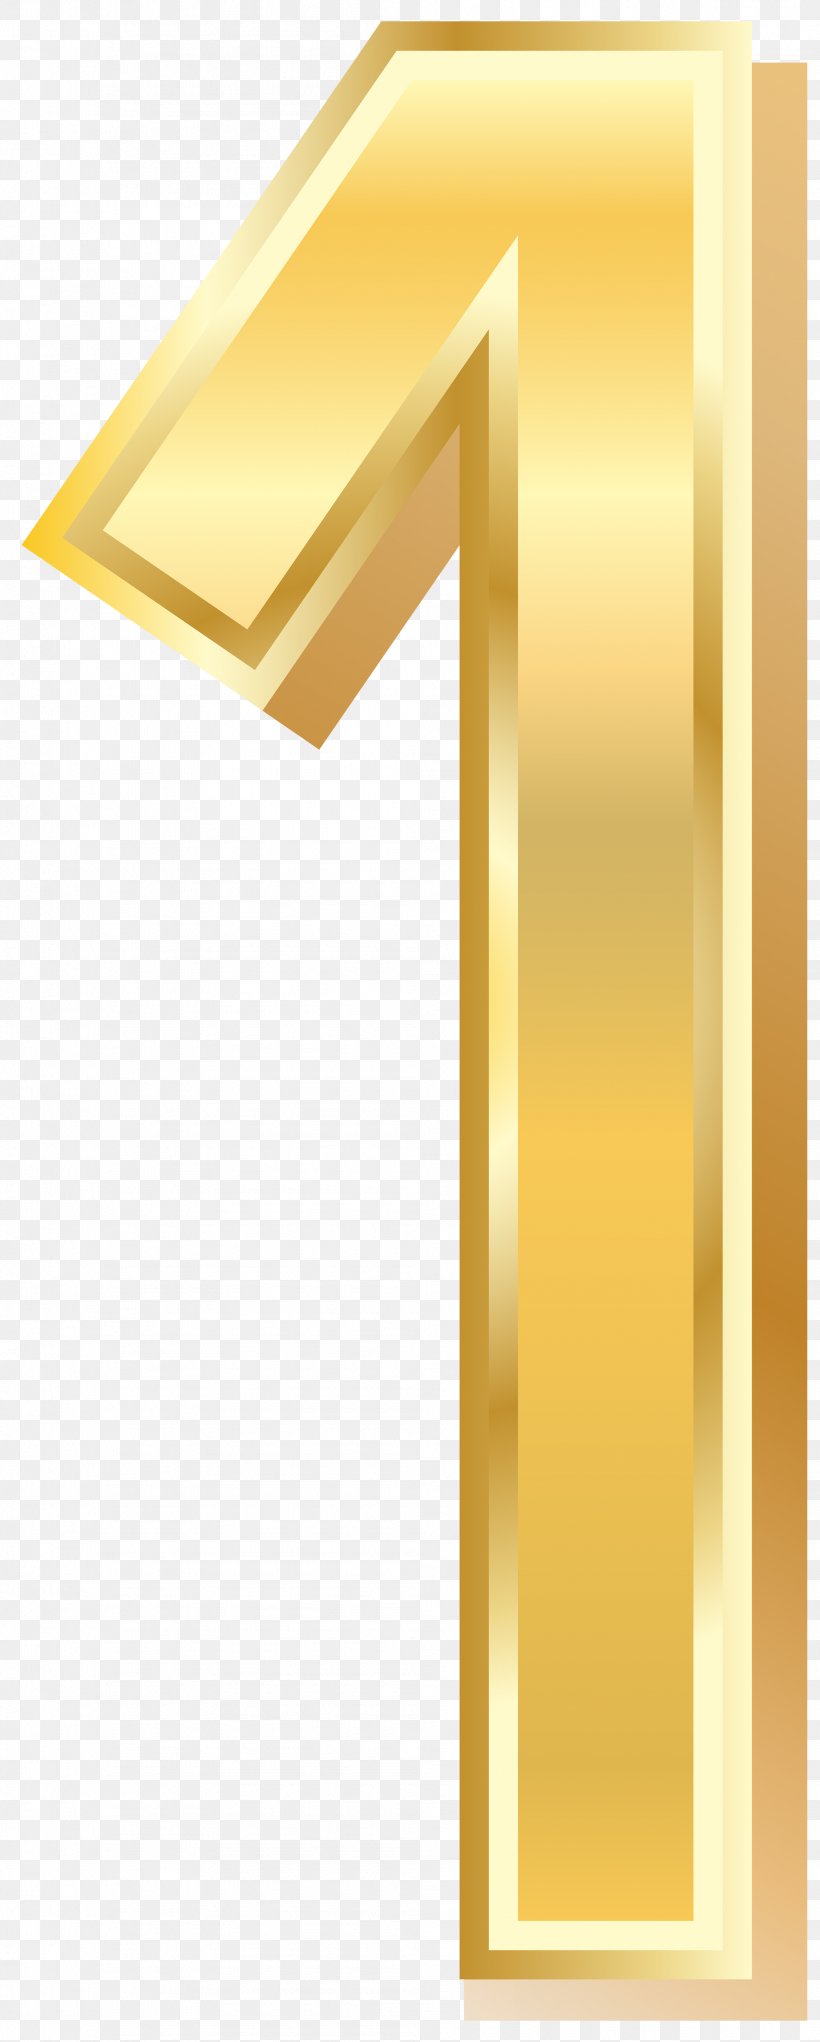 Number Clip Art, PNG, 2007x5000px, Number, Brass, Metallic Color ...